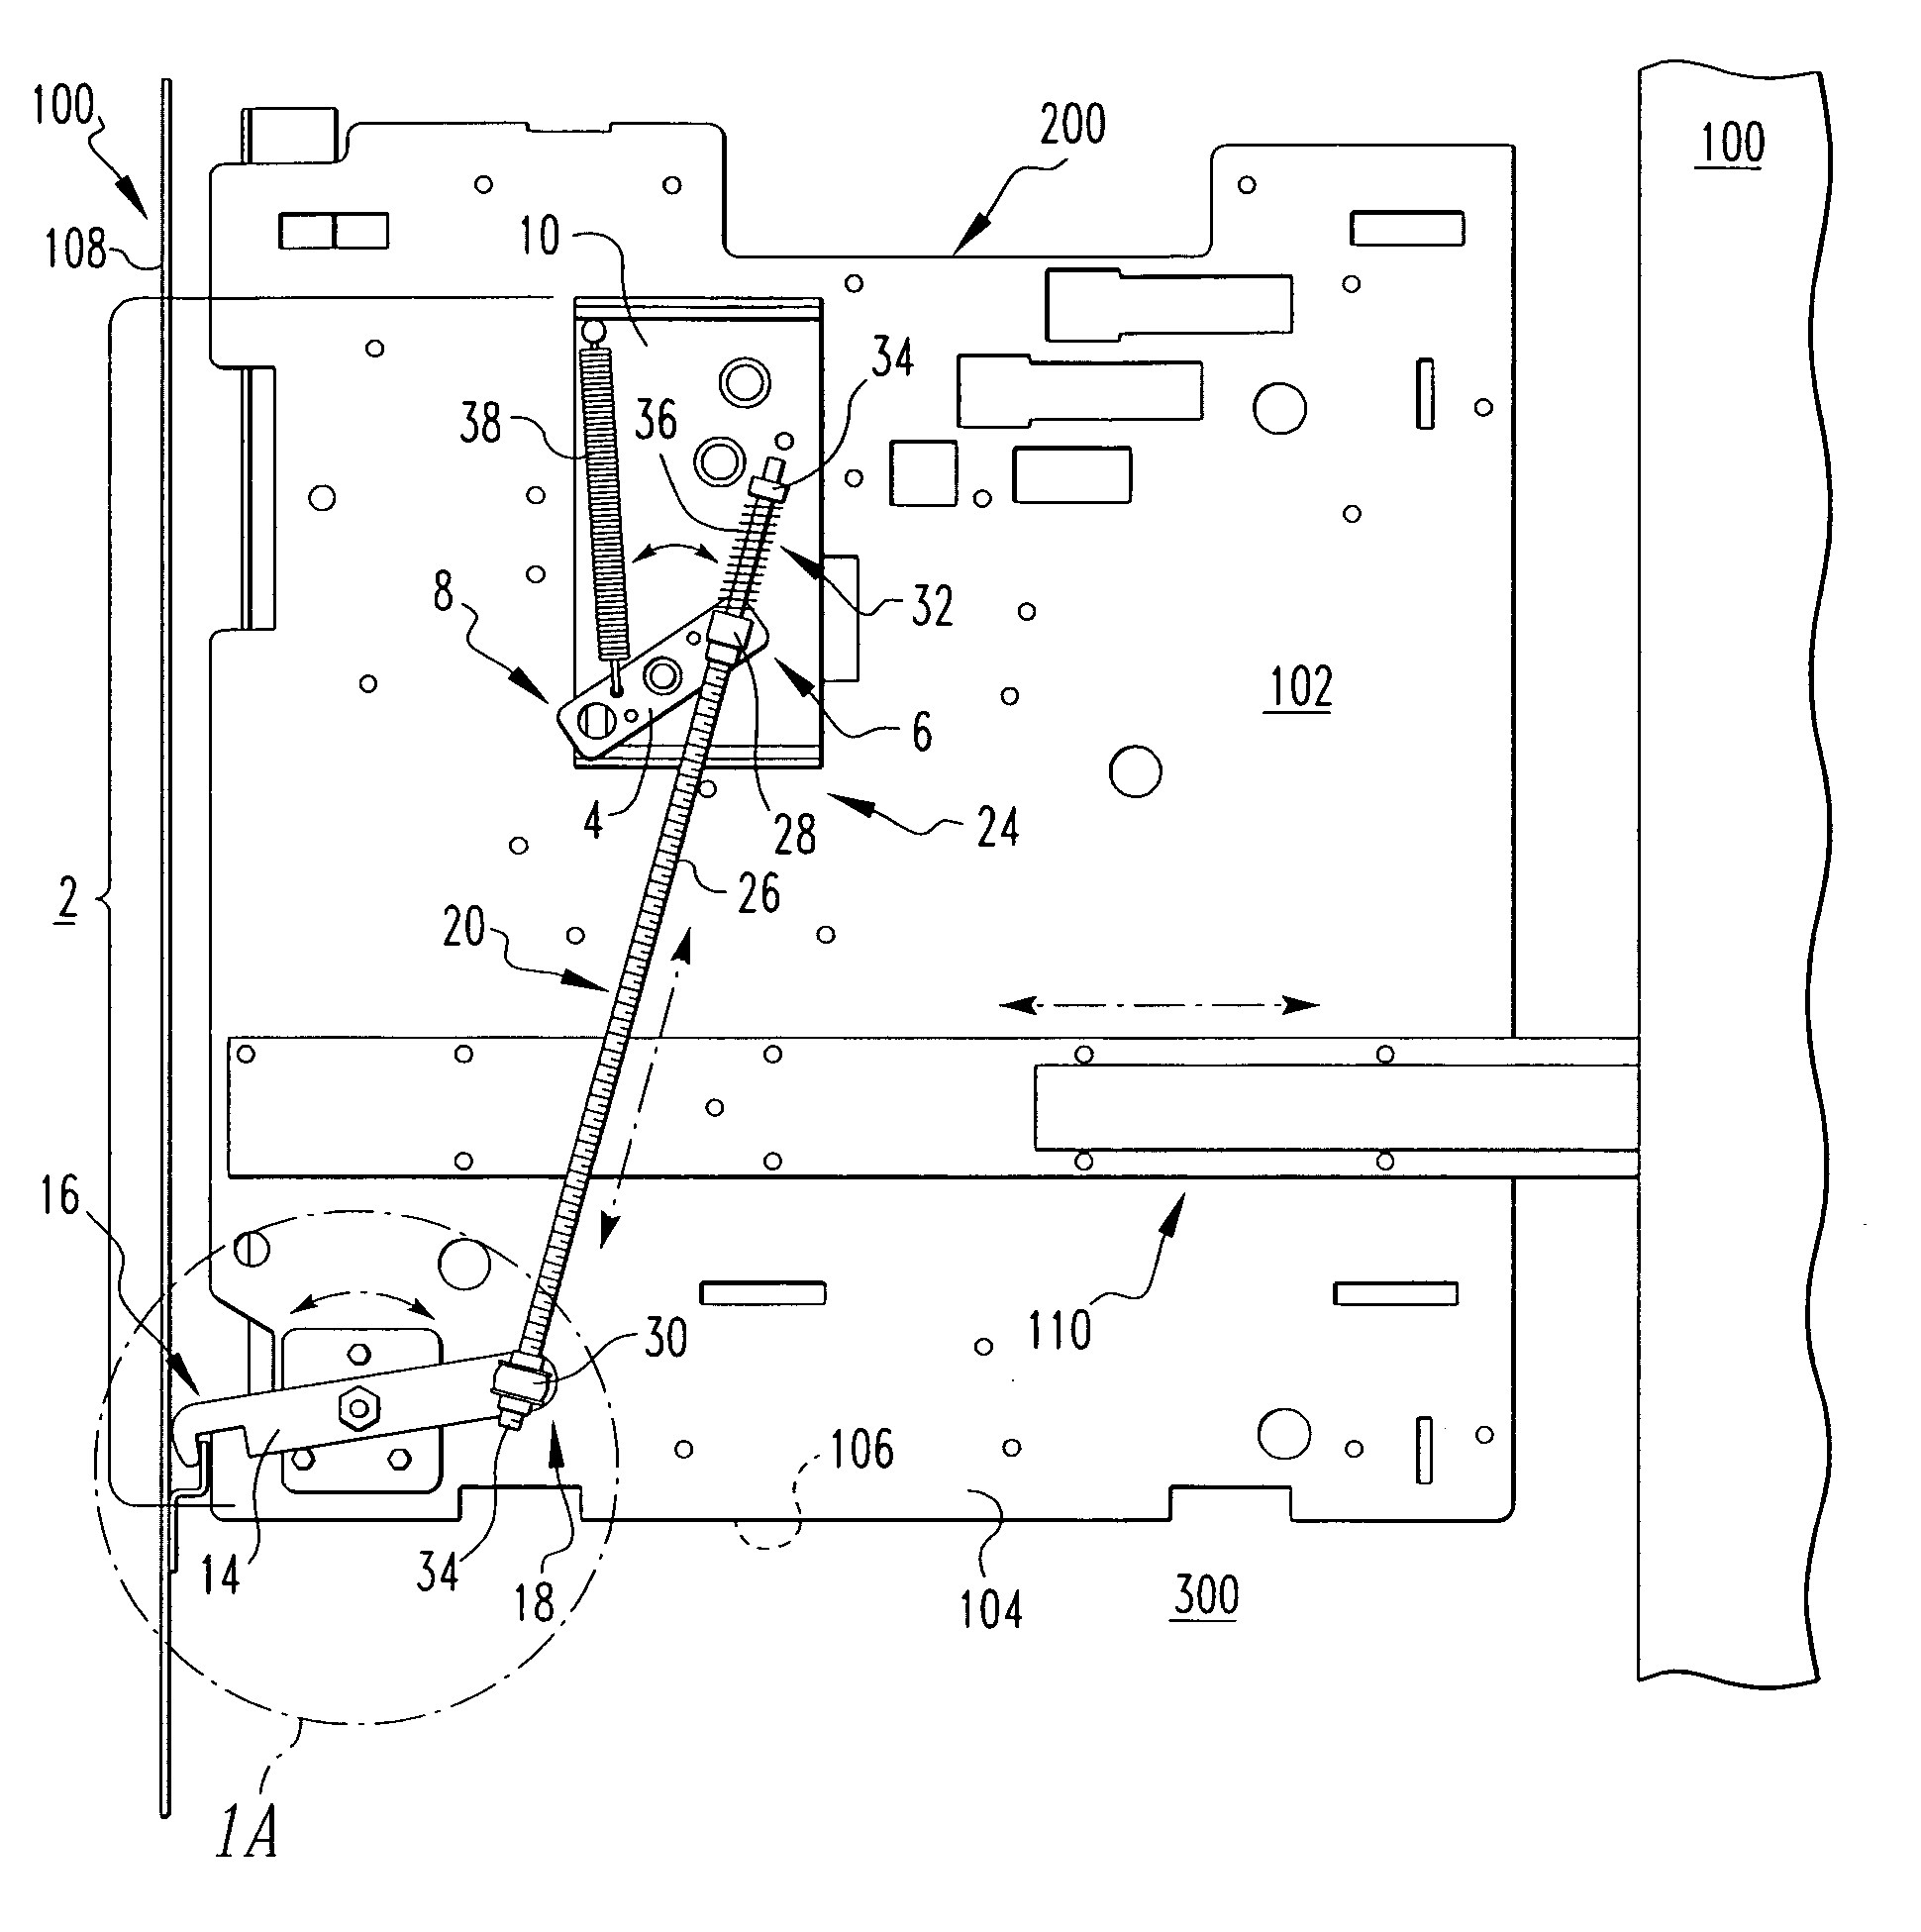 Door interlock assembly and draw-out circuit breaker assembly employing the same